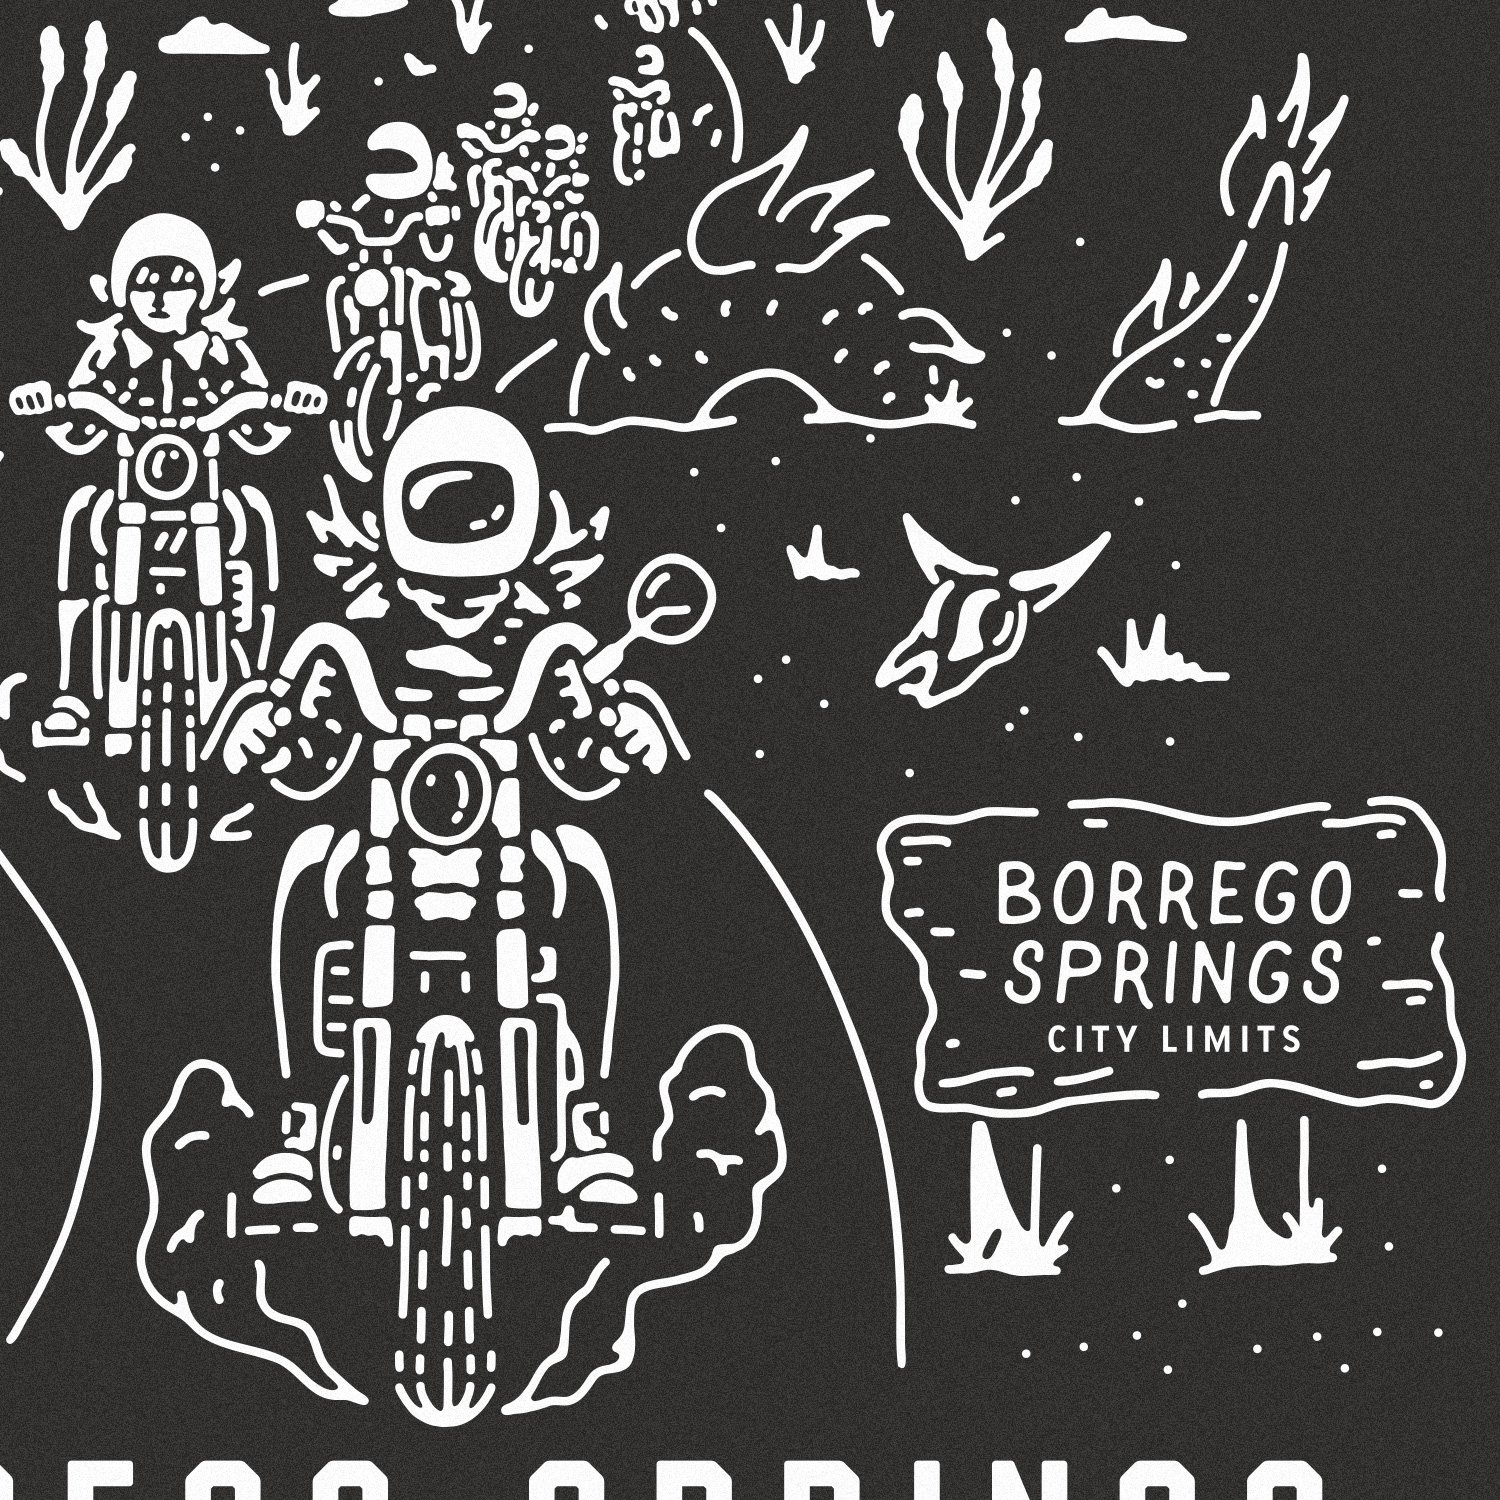  Borrego Springs, Babes Ride Out merch design detail by Cactus Country. 